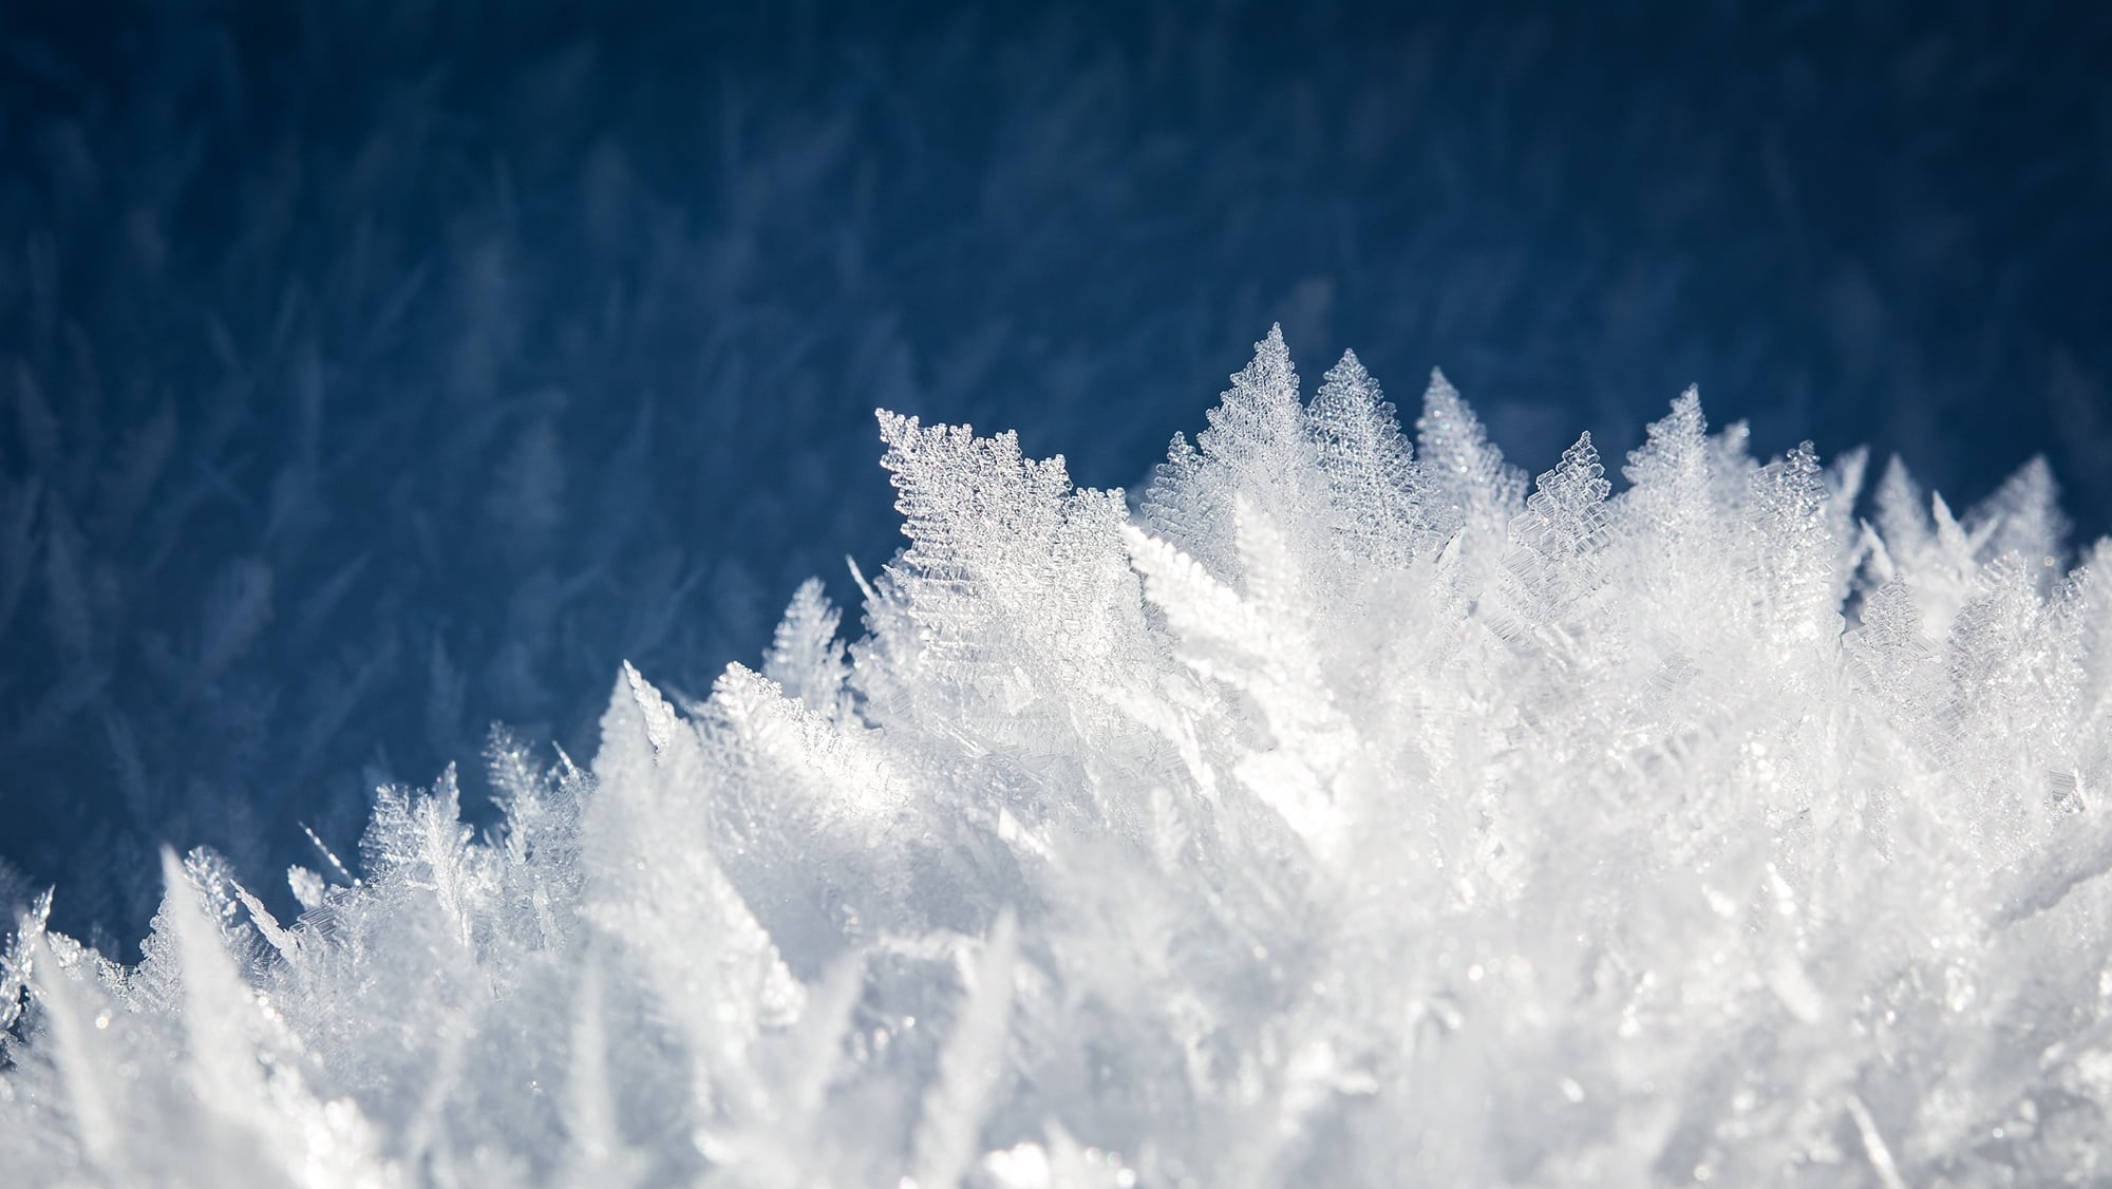 Download Blue Aesthetic Snow Crystals Wallpaper